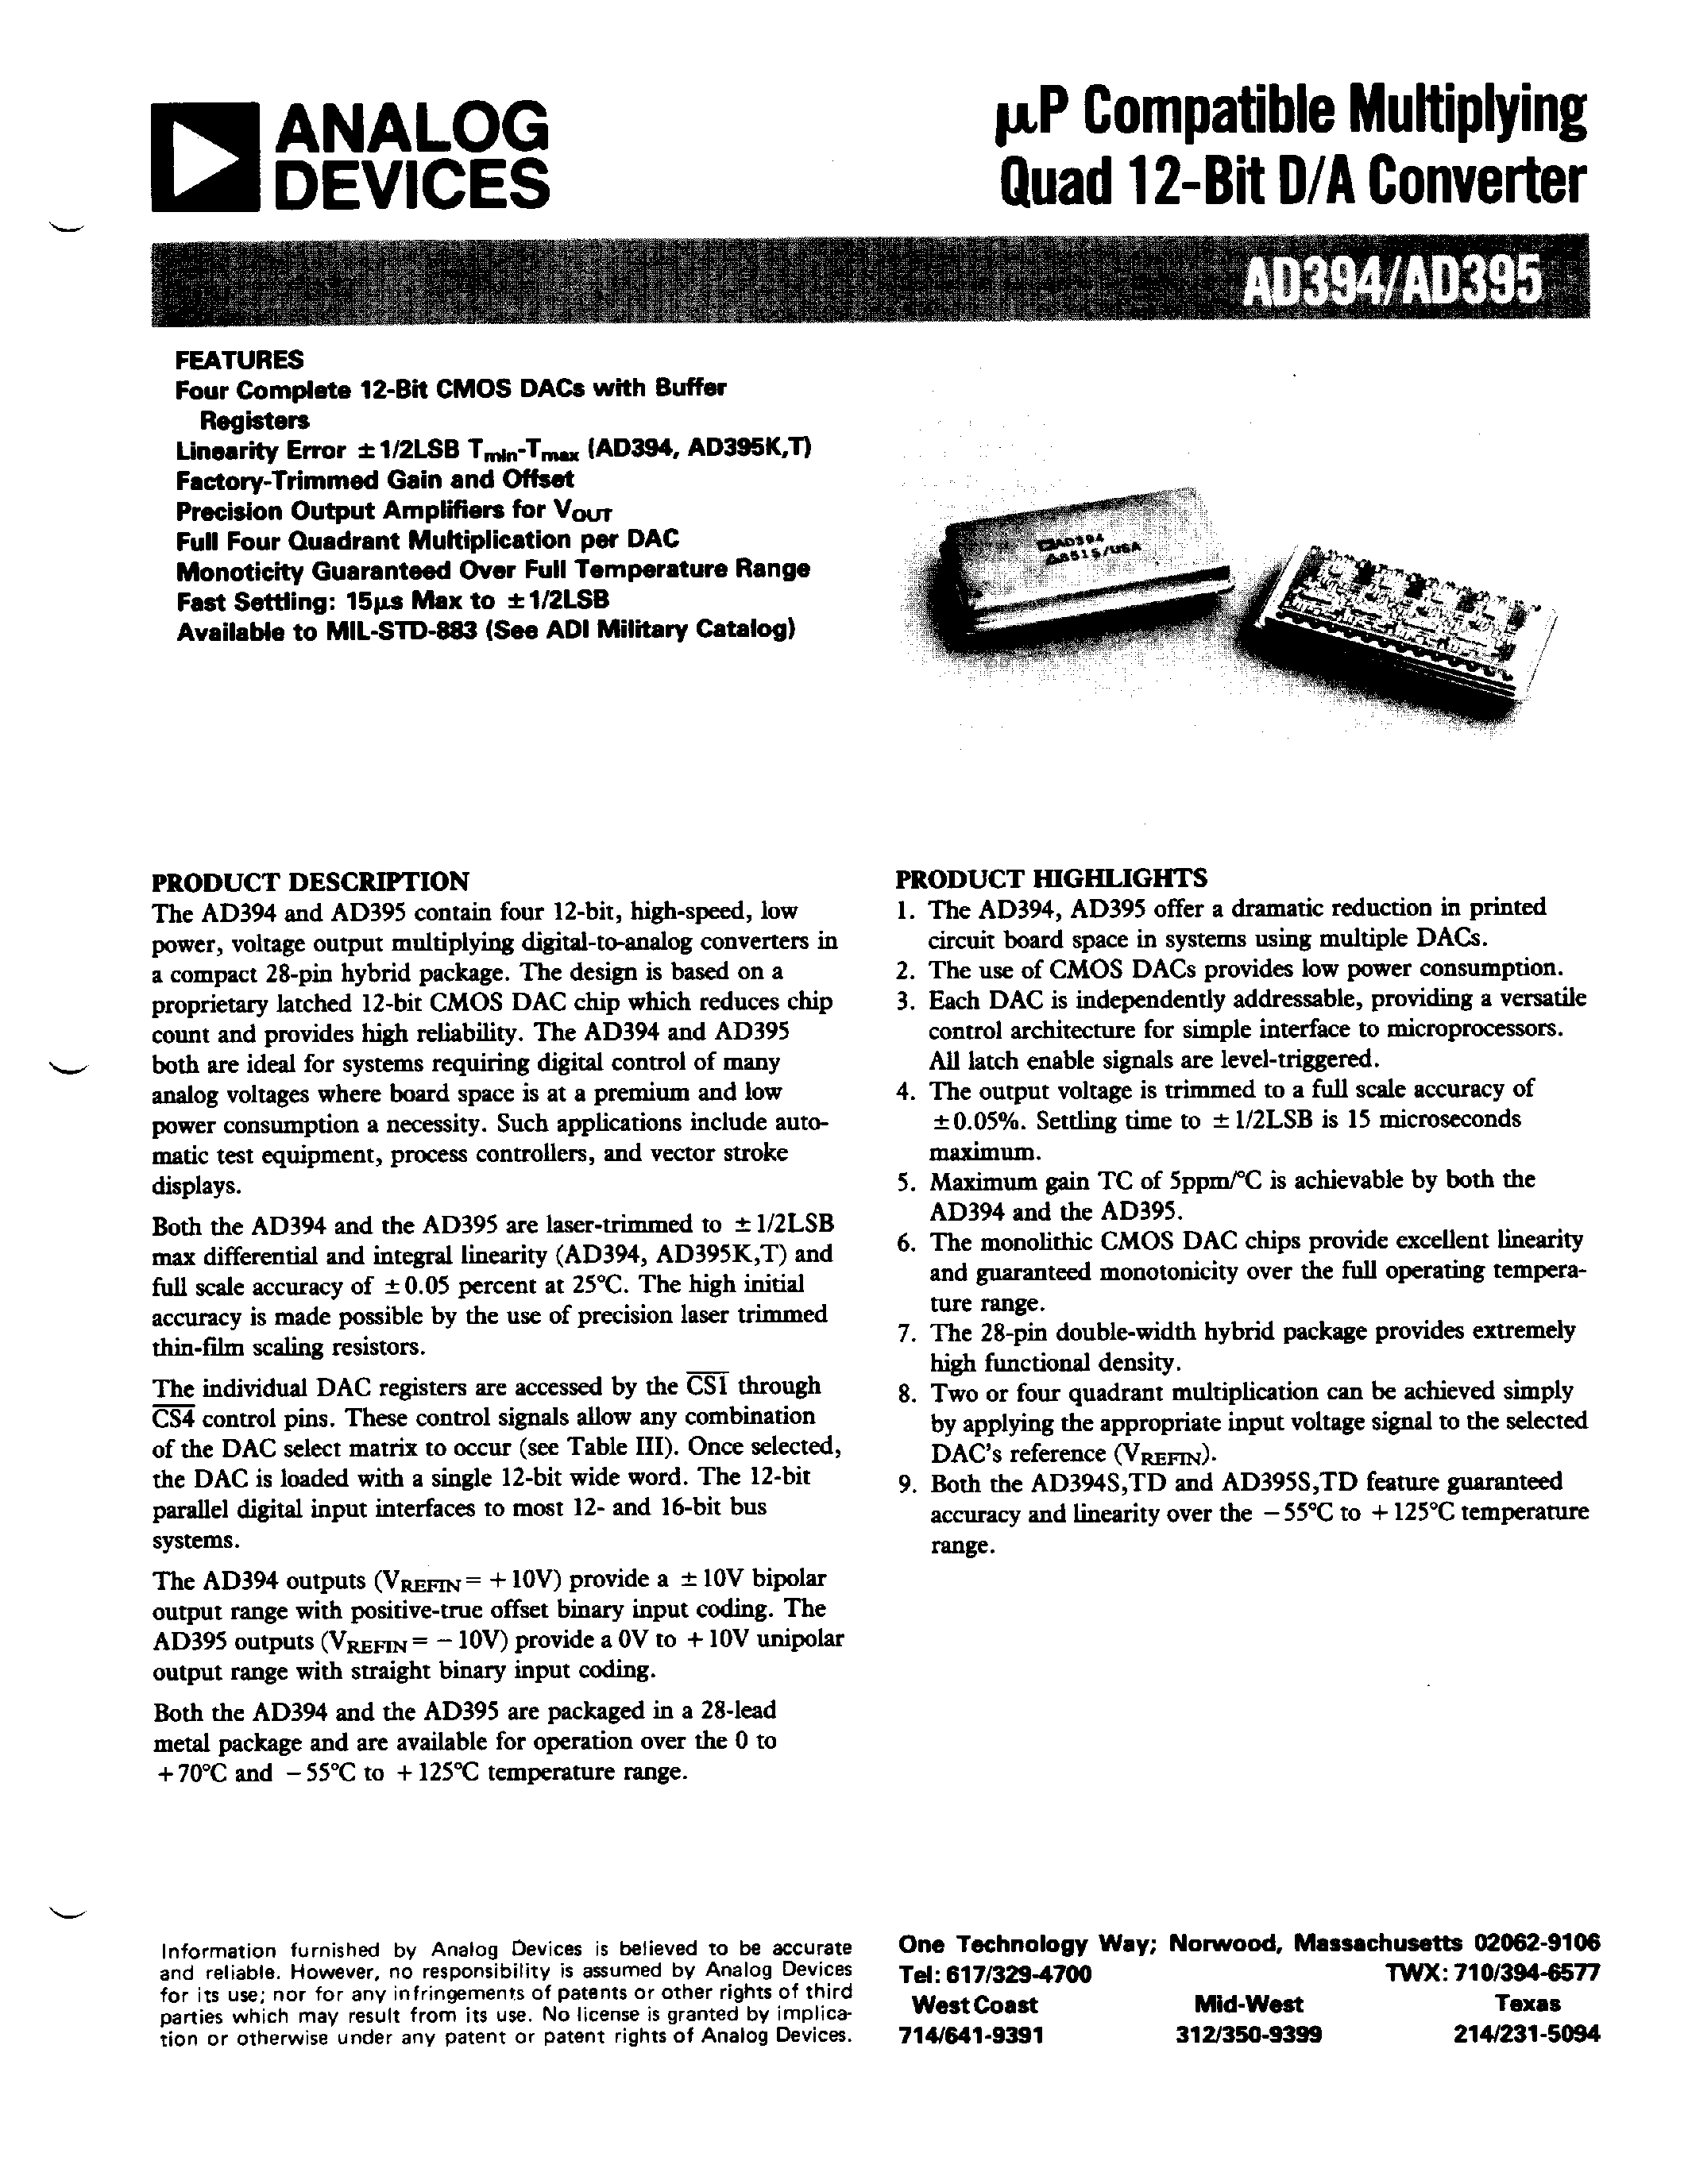 Datasheet AD395 - uP Compatible Multiplying Quad 12-Bit D/A Converter page 1